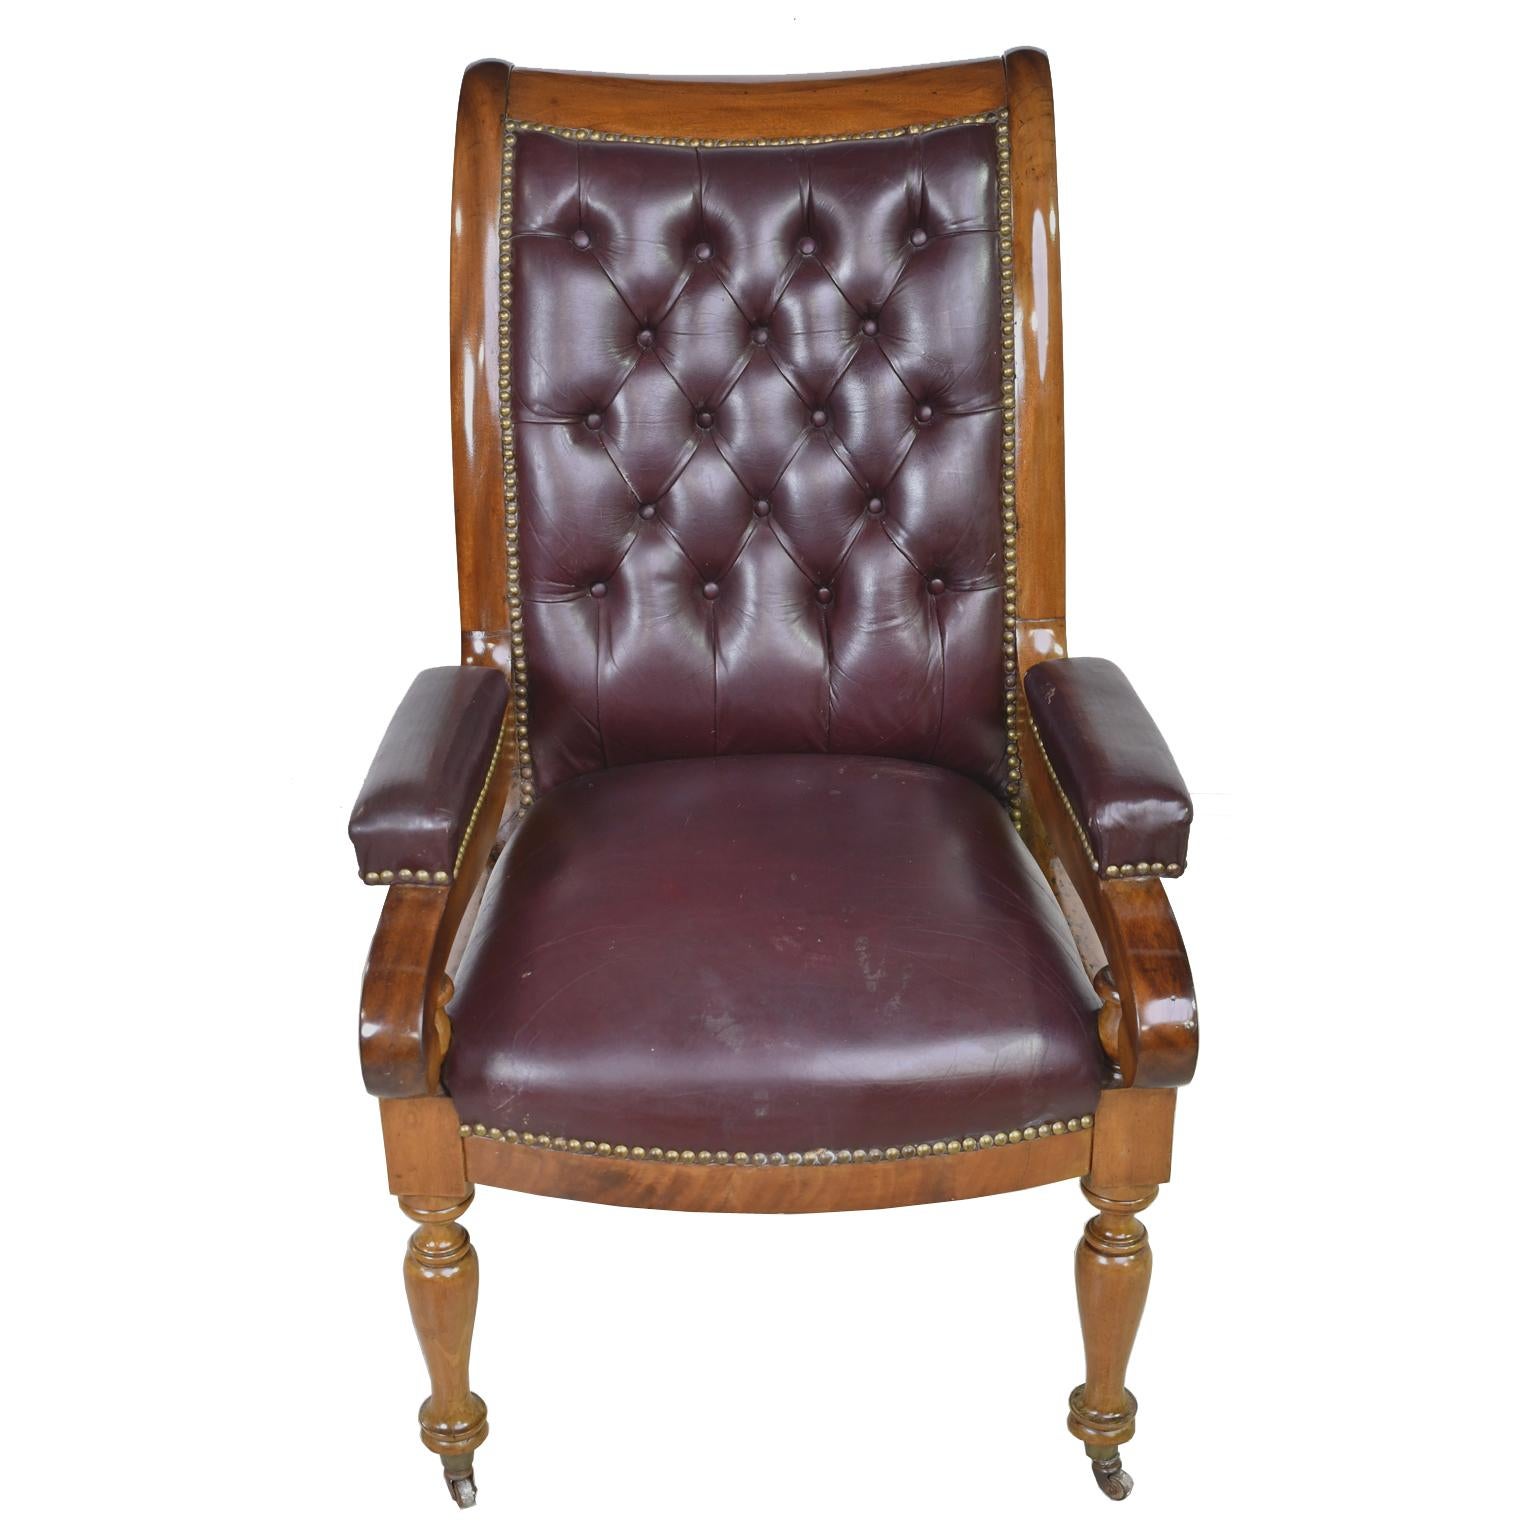 A fine Charles X desk chair in mahogany with scrolled arms, curved/ bowed seat, turned front legs on porcelain casters, and square saber, rear legs. France, circa 1820. The frame has a burgundy/brown- colored leather upholstery with decorative brass